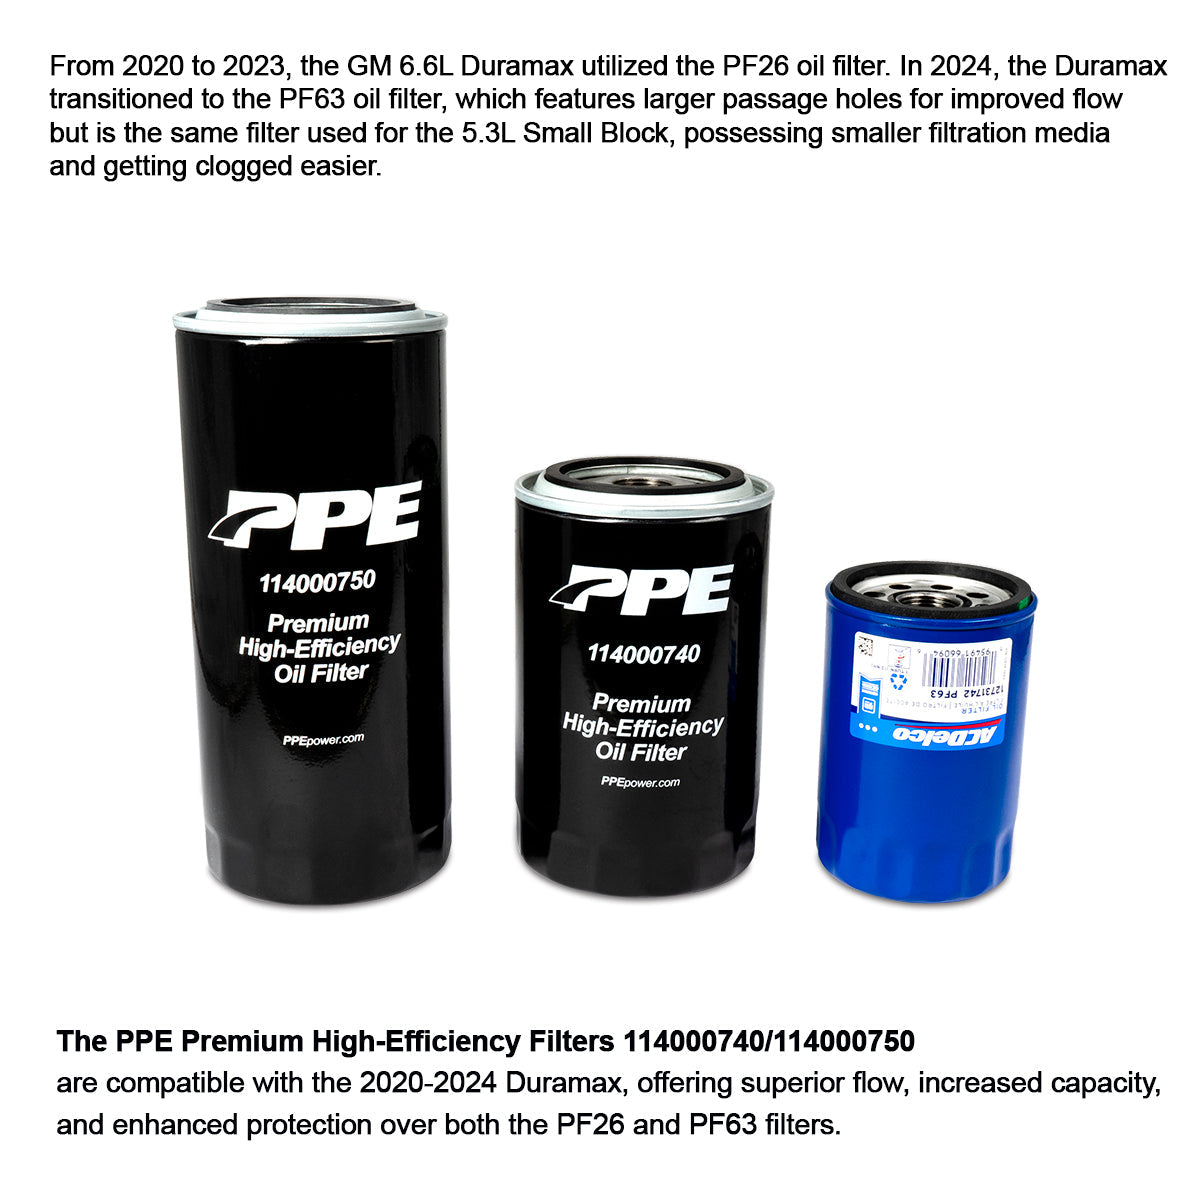 Premium High-Efficiency Engine Oil Filter (AC Delco PF26, Motorcraft FL-820S & MO-899 ) ppepower